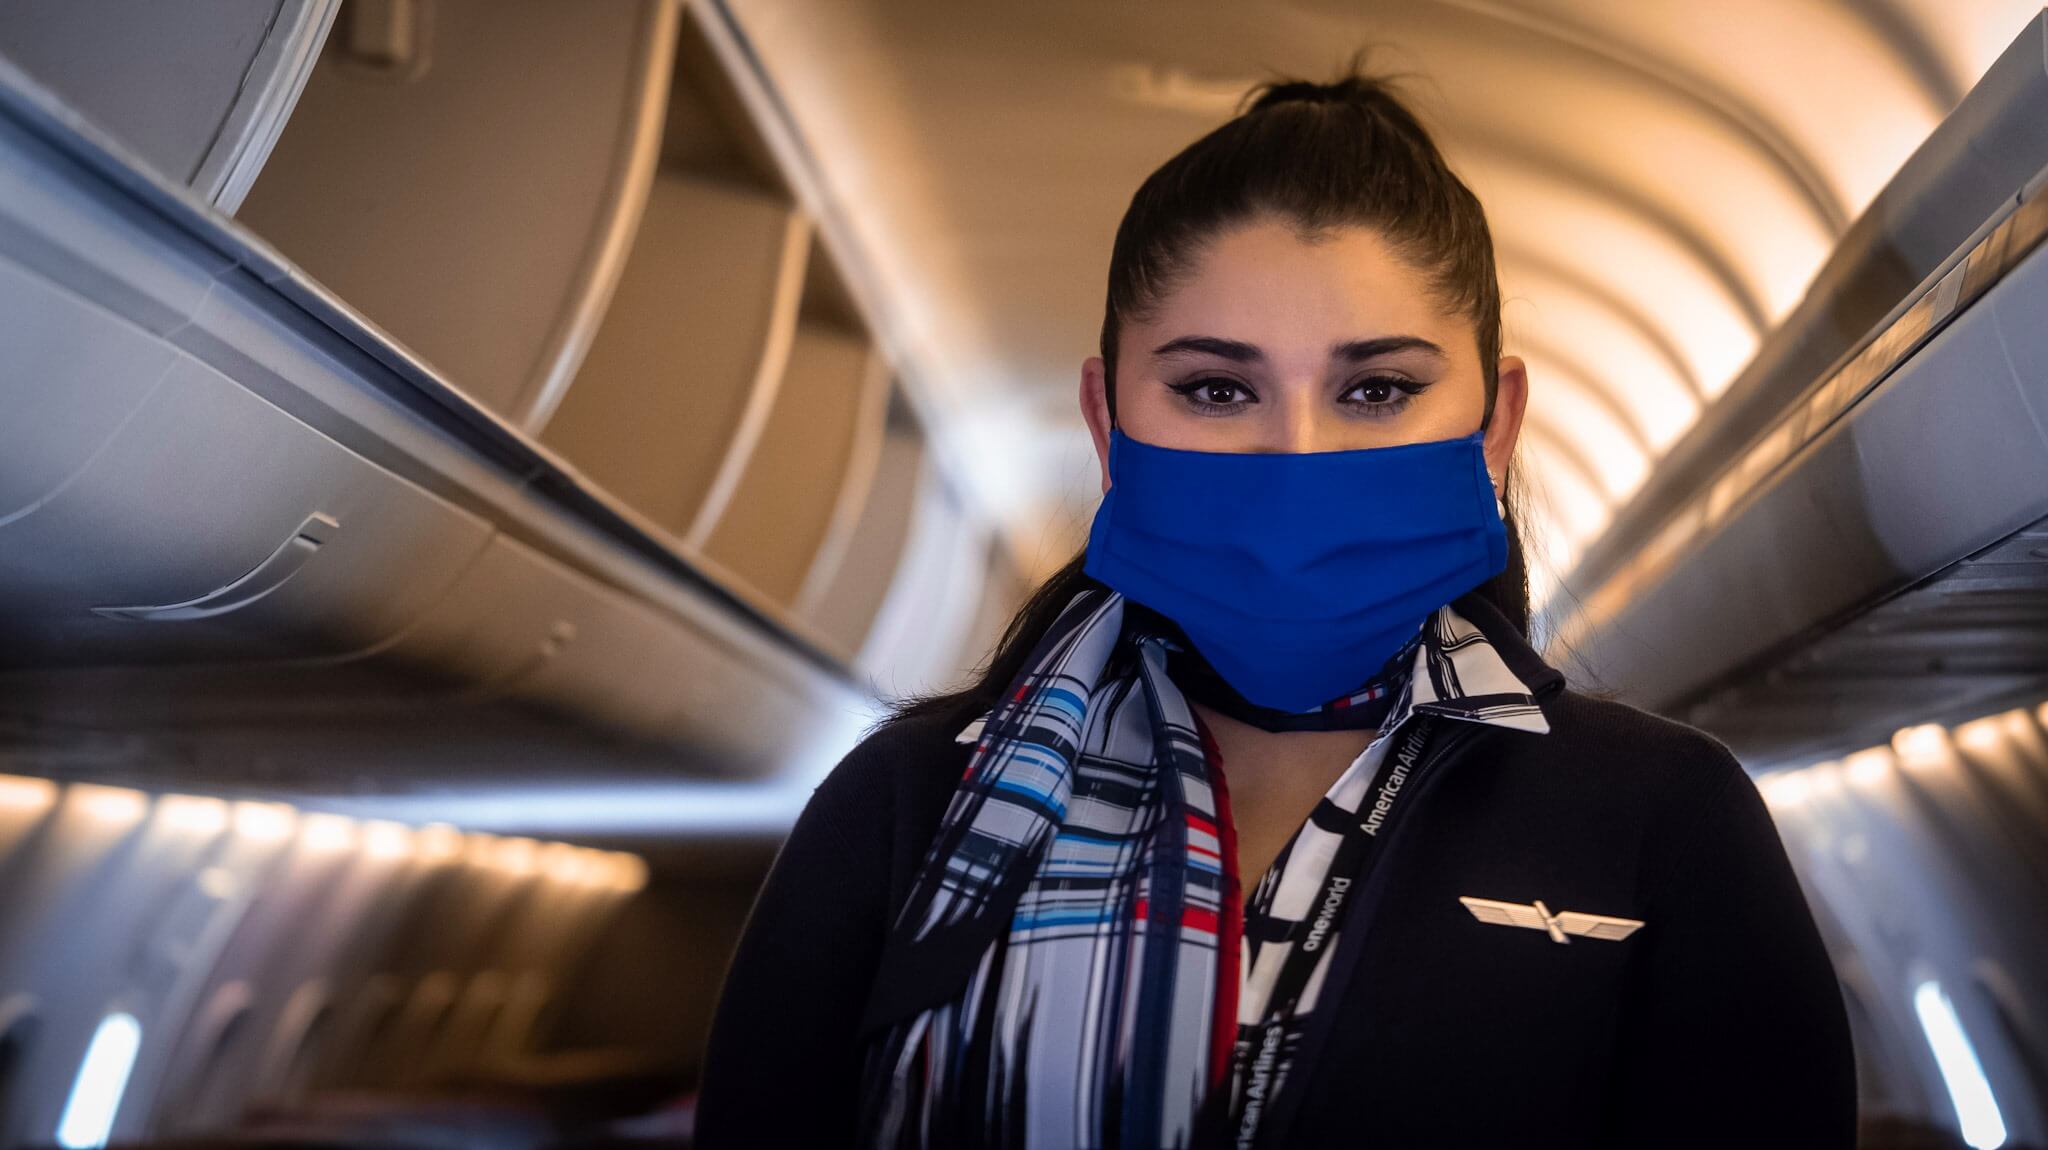 piedmont airlines flight attendant with mask on